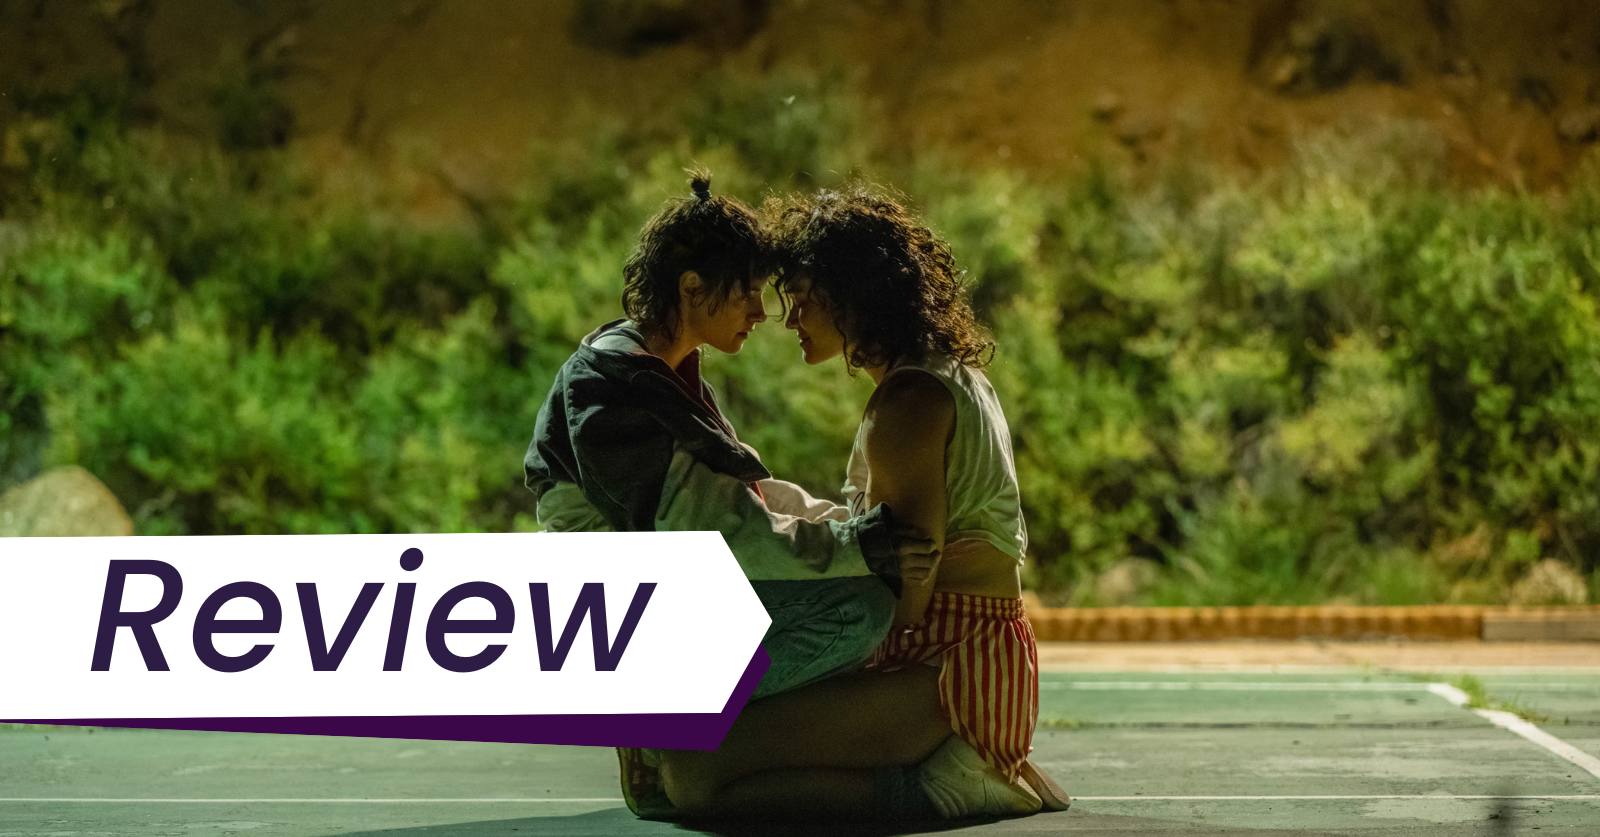 Still of  Lou (Kristen Stewart) and Jackie (Katy O'Brian) in Rose Glass's film Love Lies Bleeding, which Lena Wilson Reviews. Photo courtesy of A24 Films. Two women sit kneeling as if in an embrace on a tennis court, their heads together.